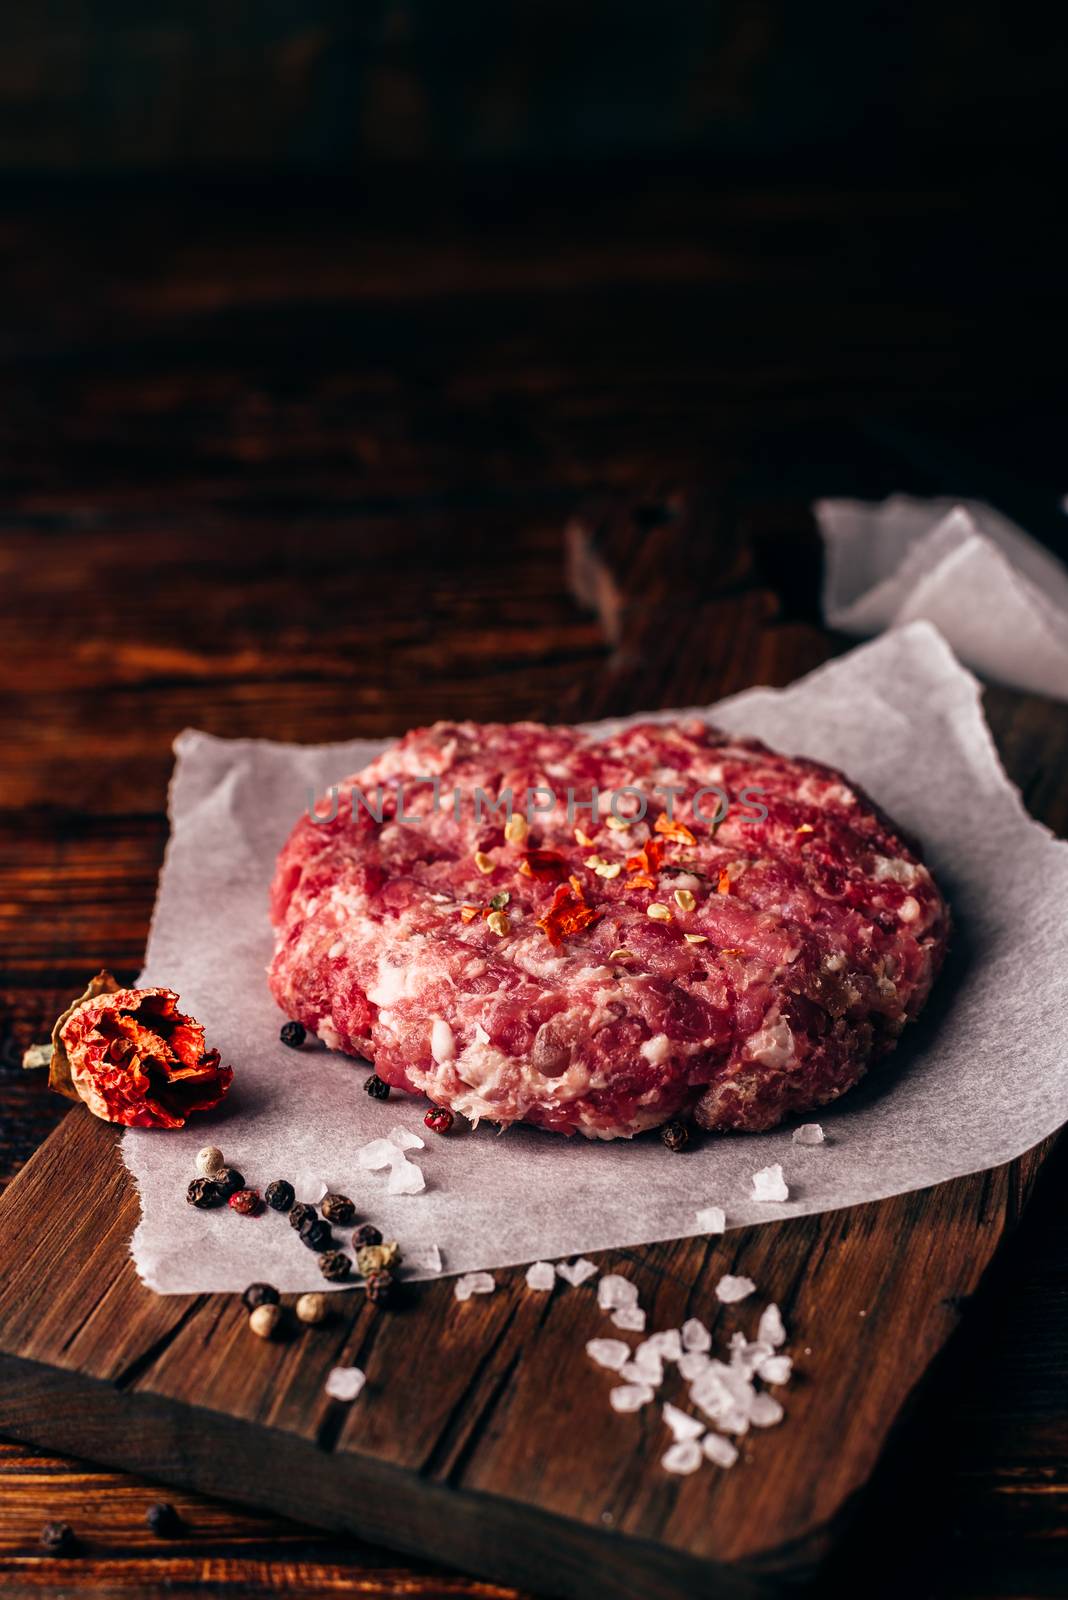 Raw Patty with Spices. by Seva_blsv